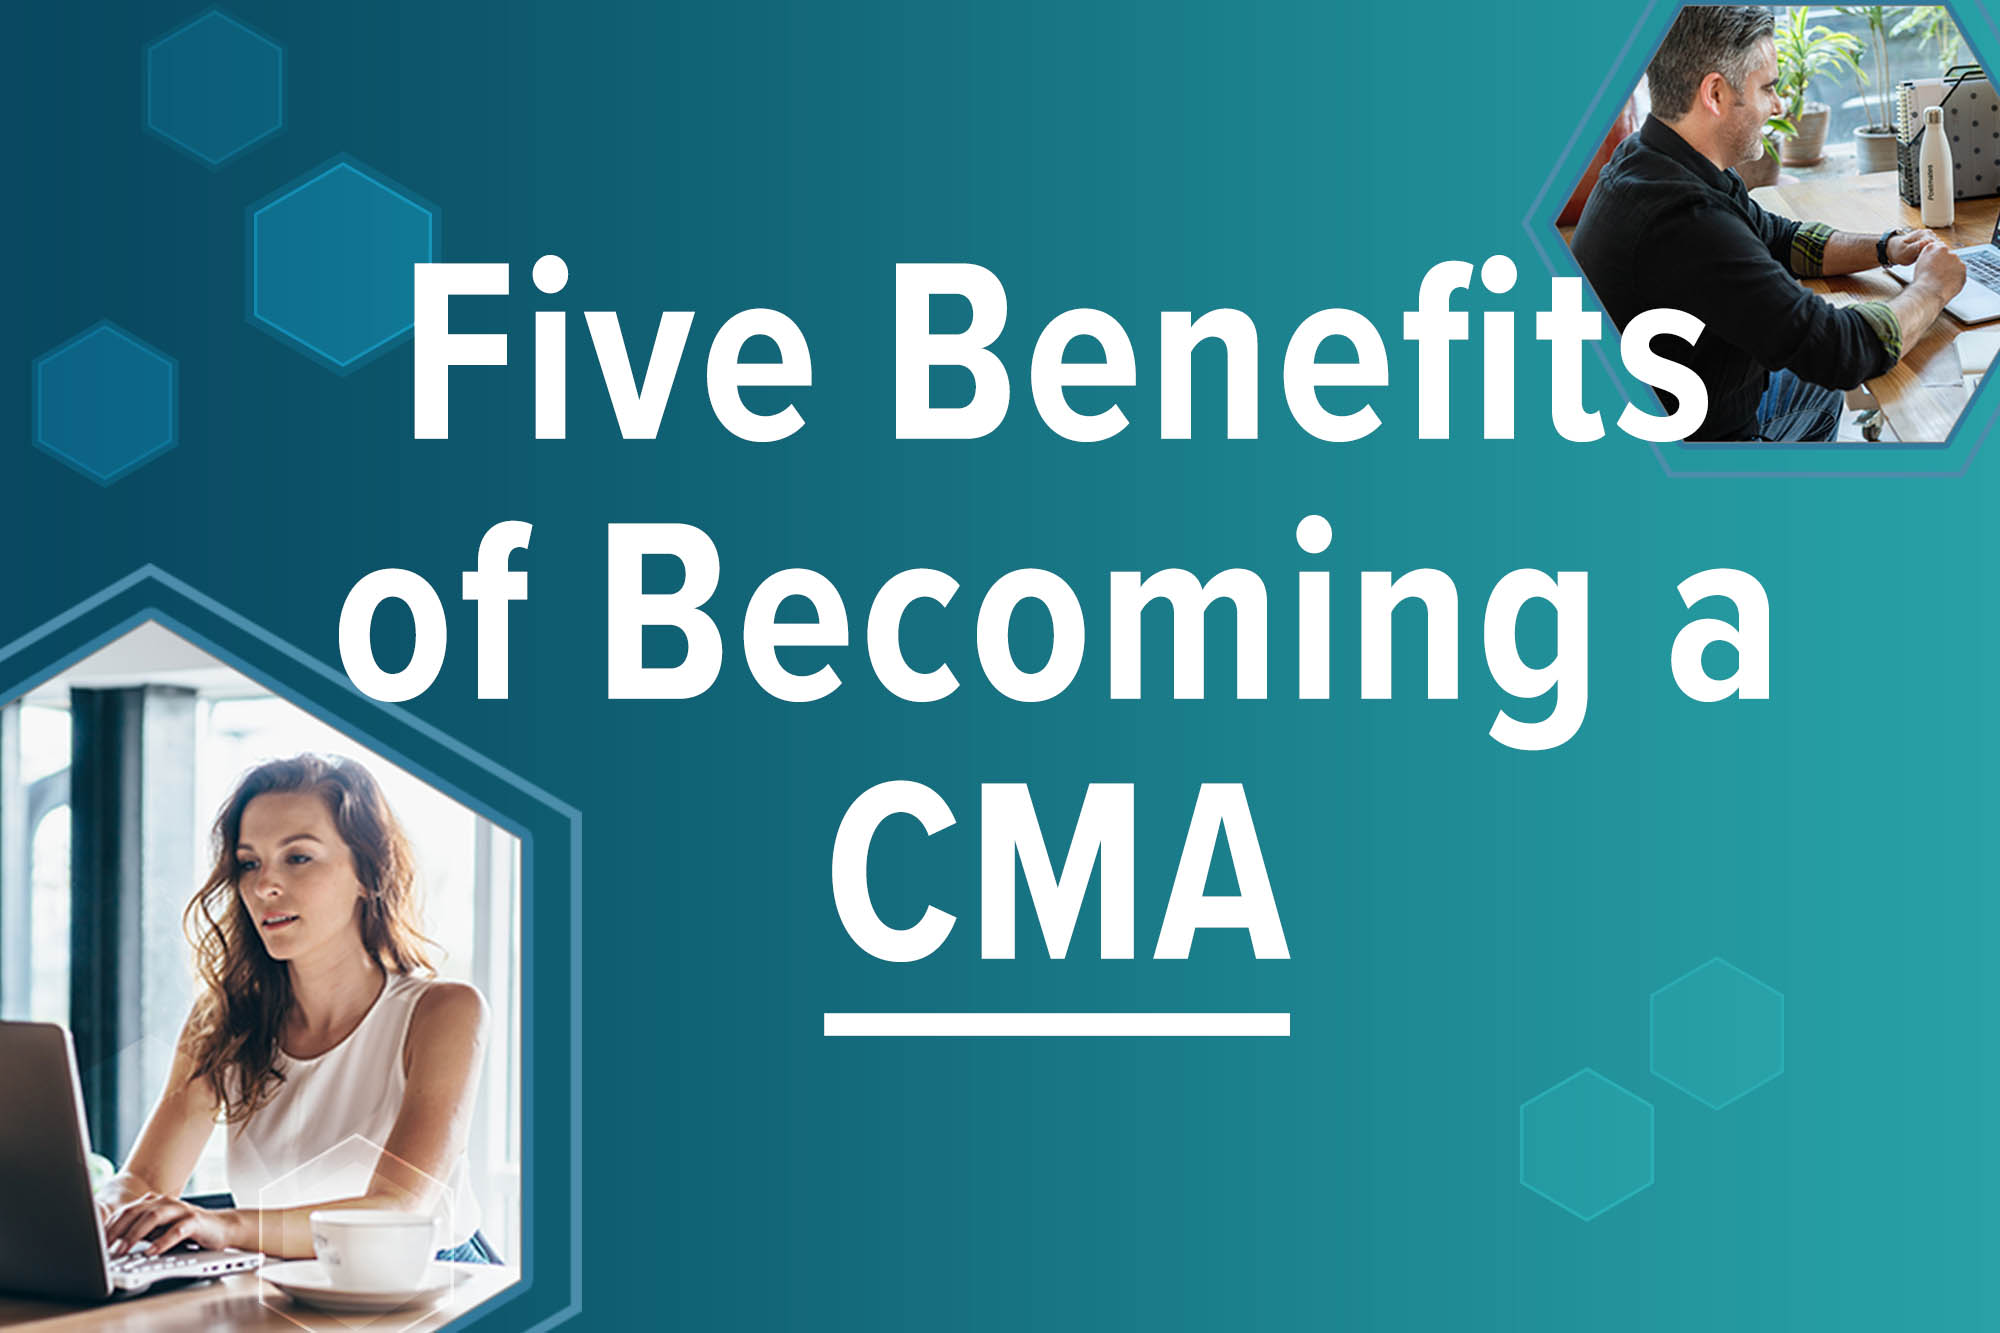 Five benefits of becoming a CMA